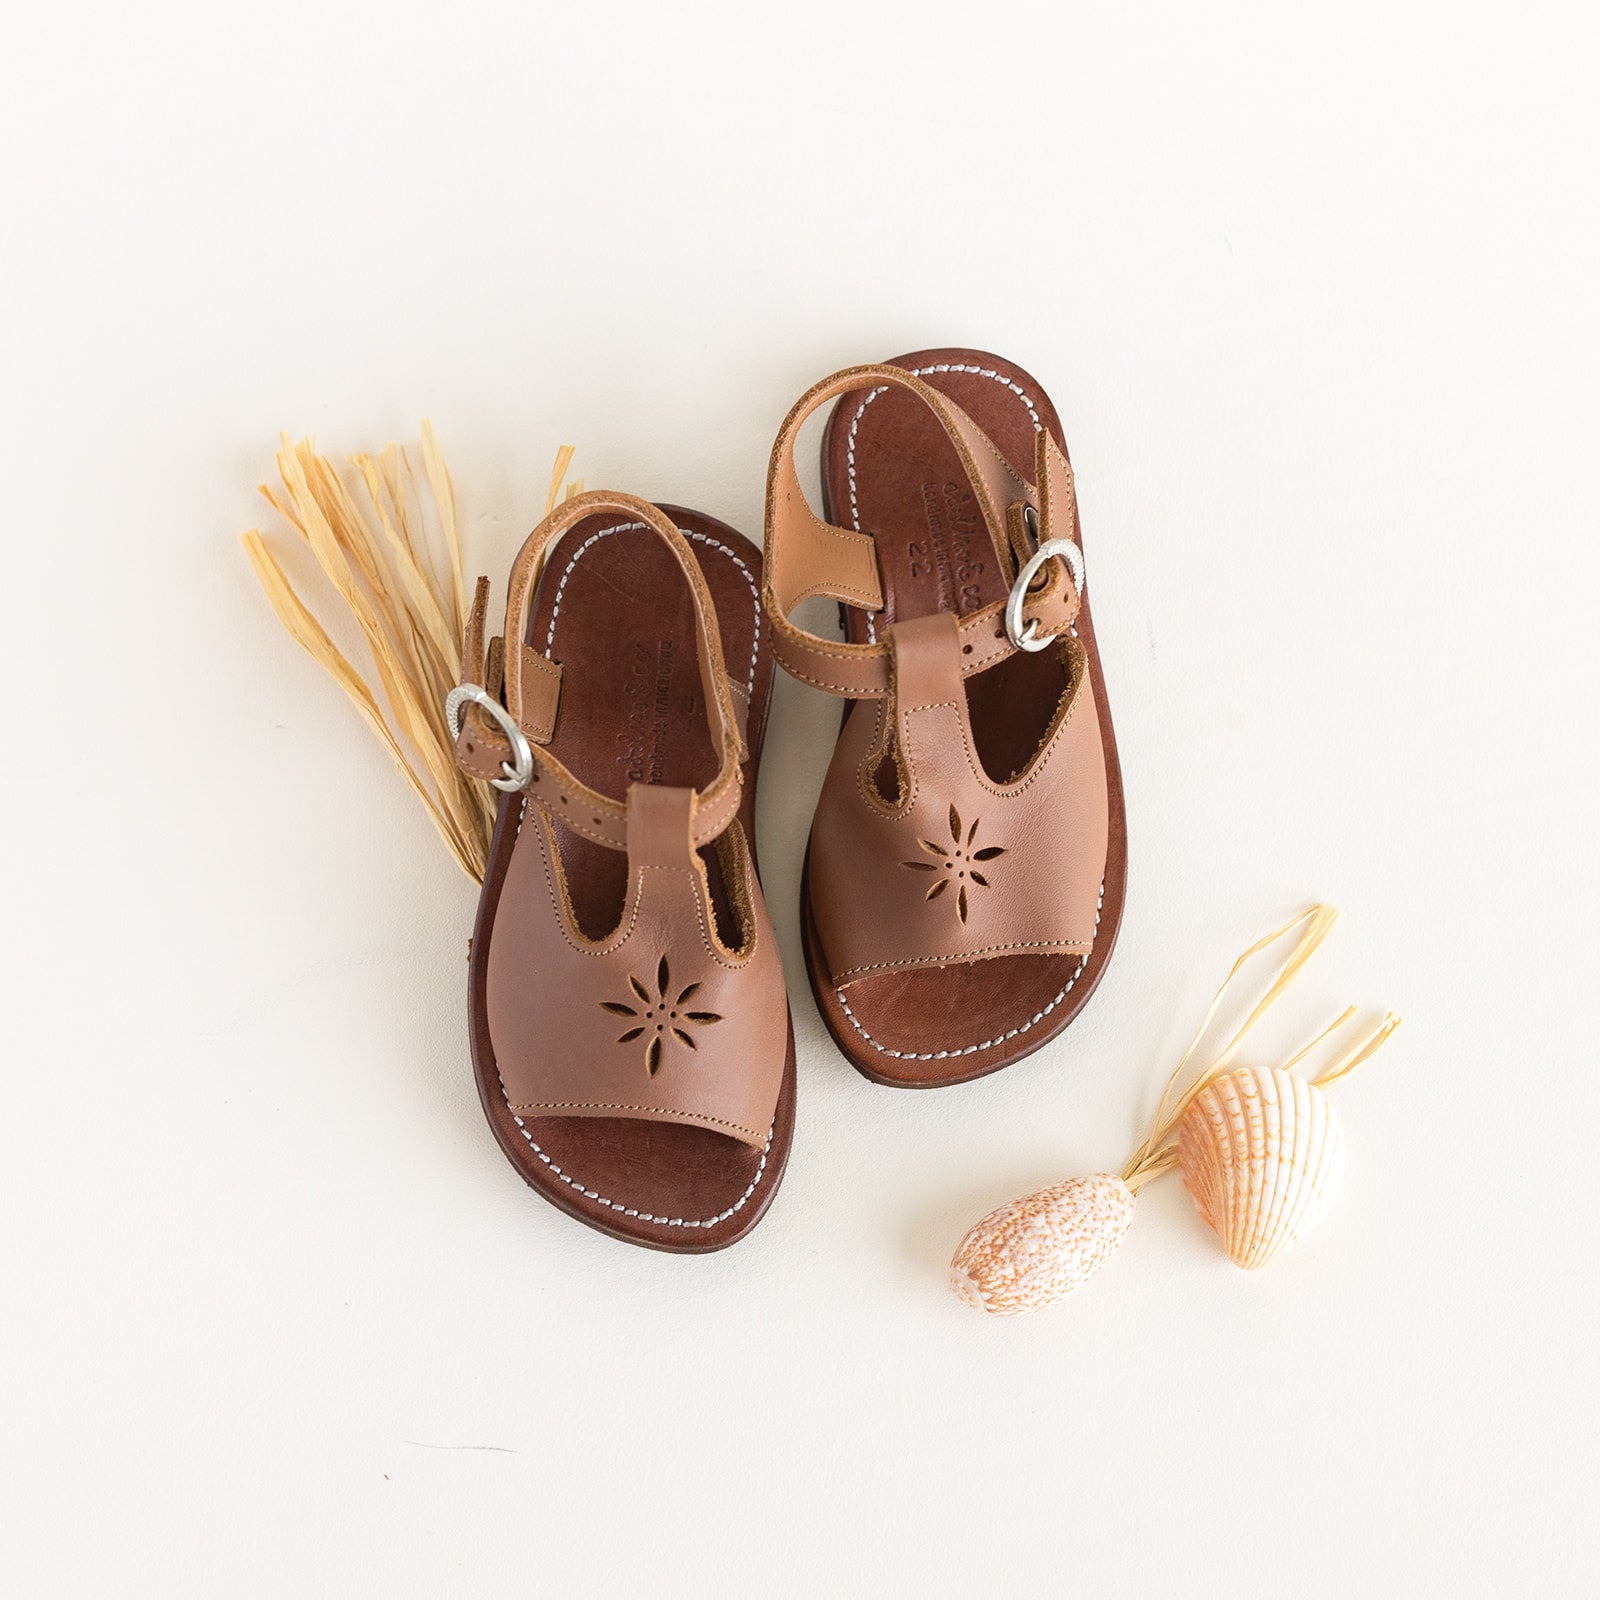 Adelisa &amp; Co T-bar leather sandals for girls with floral detailing.